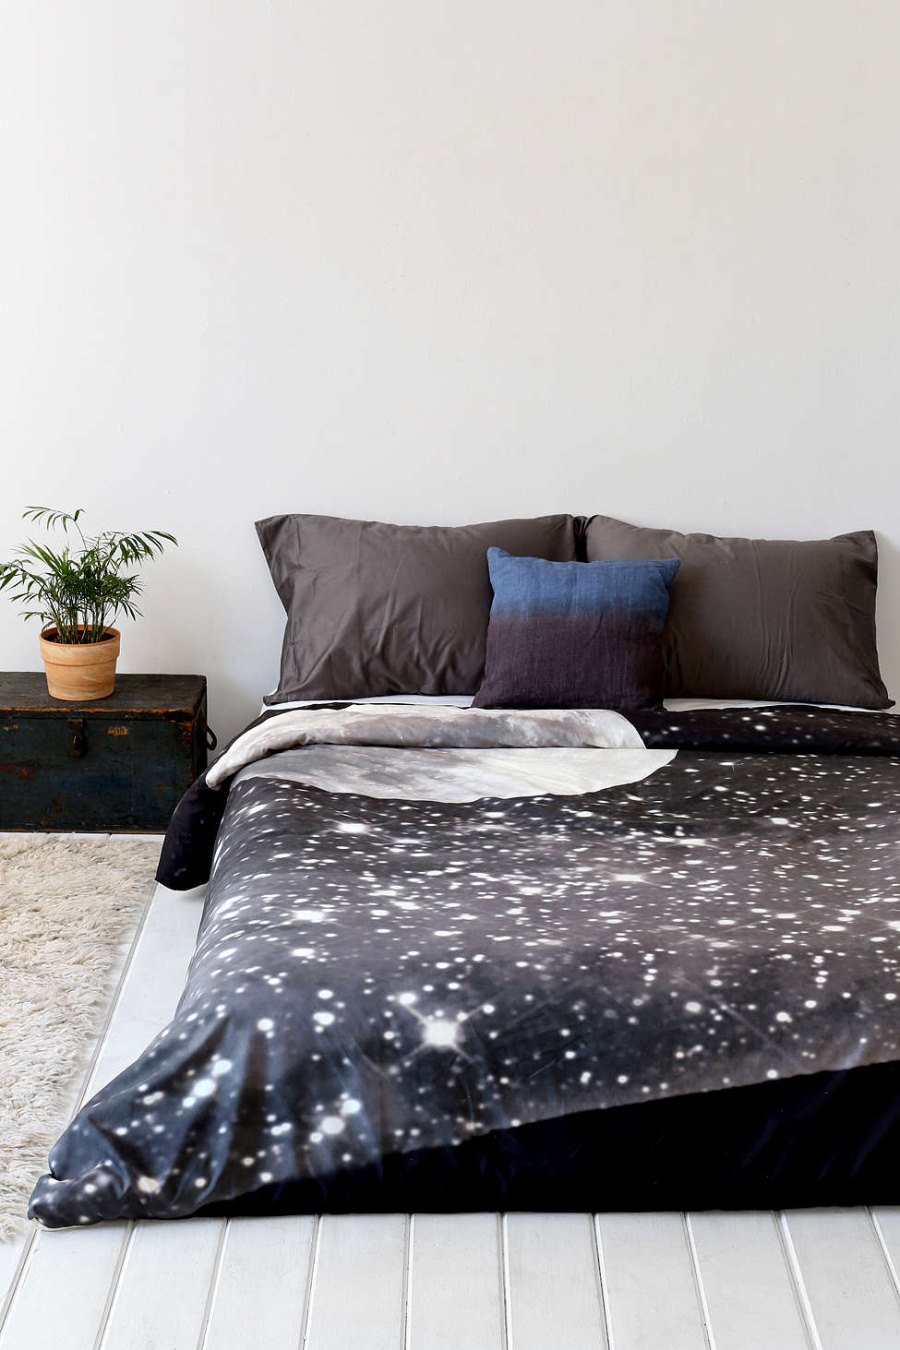 Starry duvet cover from Urban Outfitters